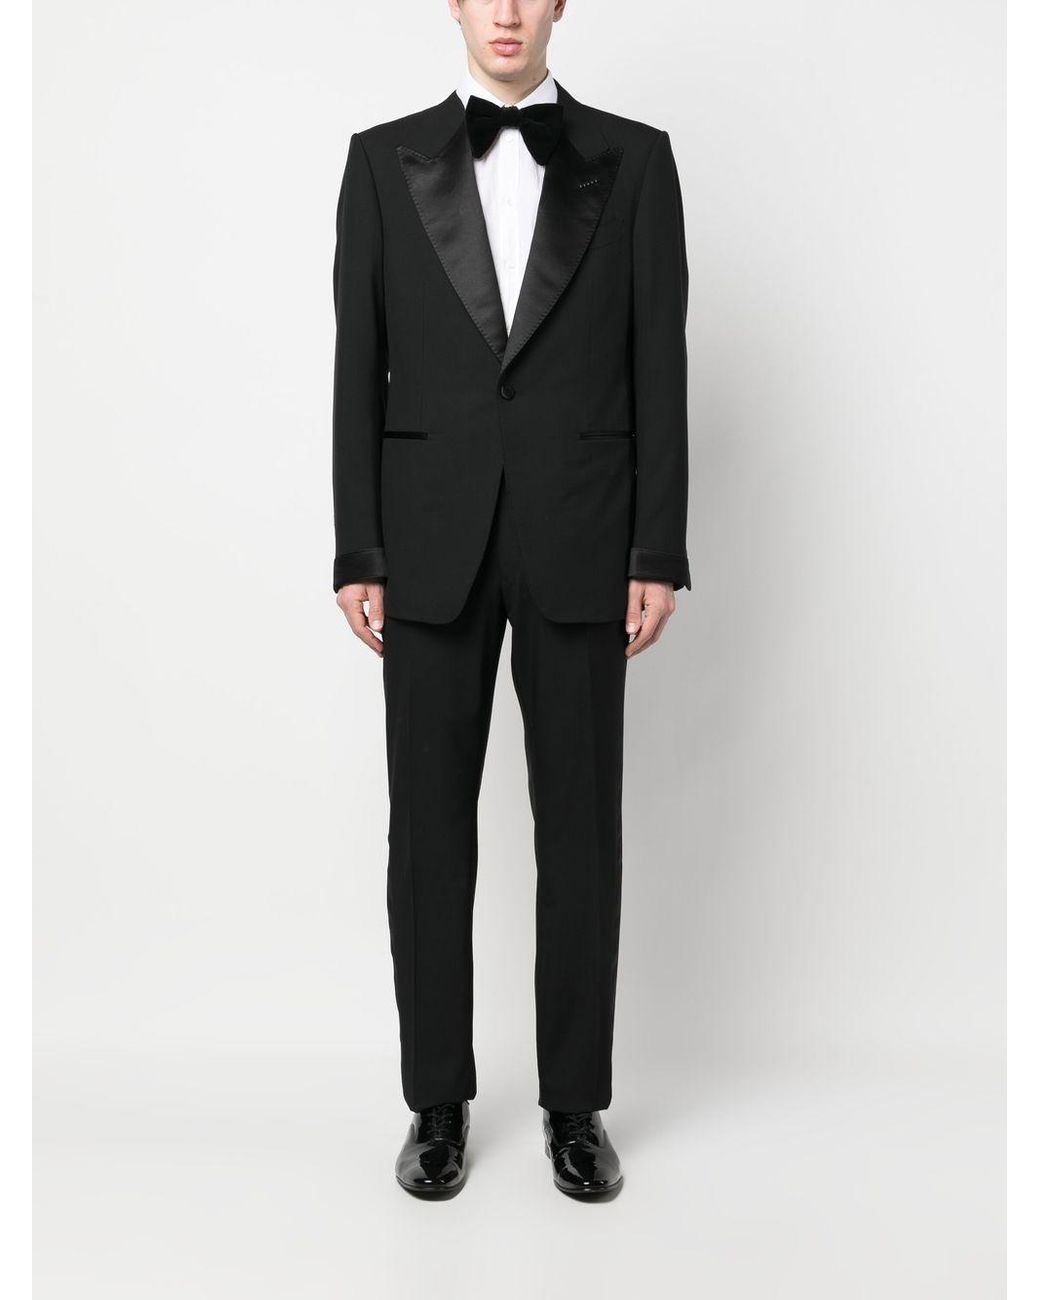 Tom Ford Wool Tailored Suit in Black for Men | Lyst UK